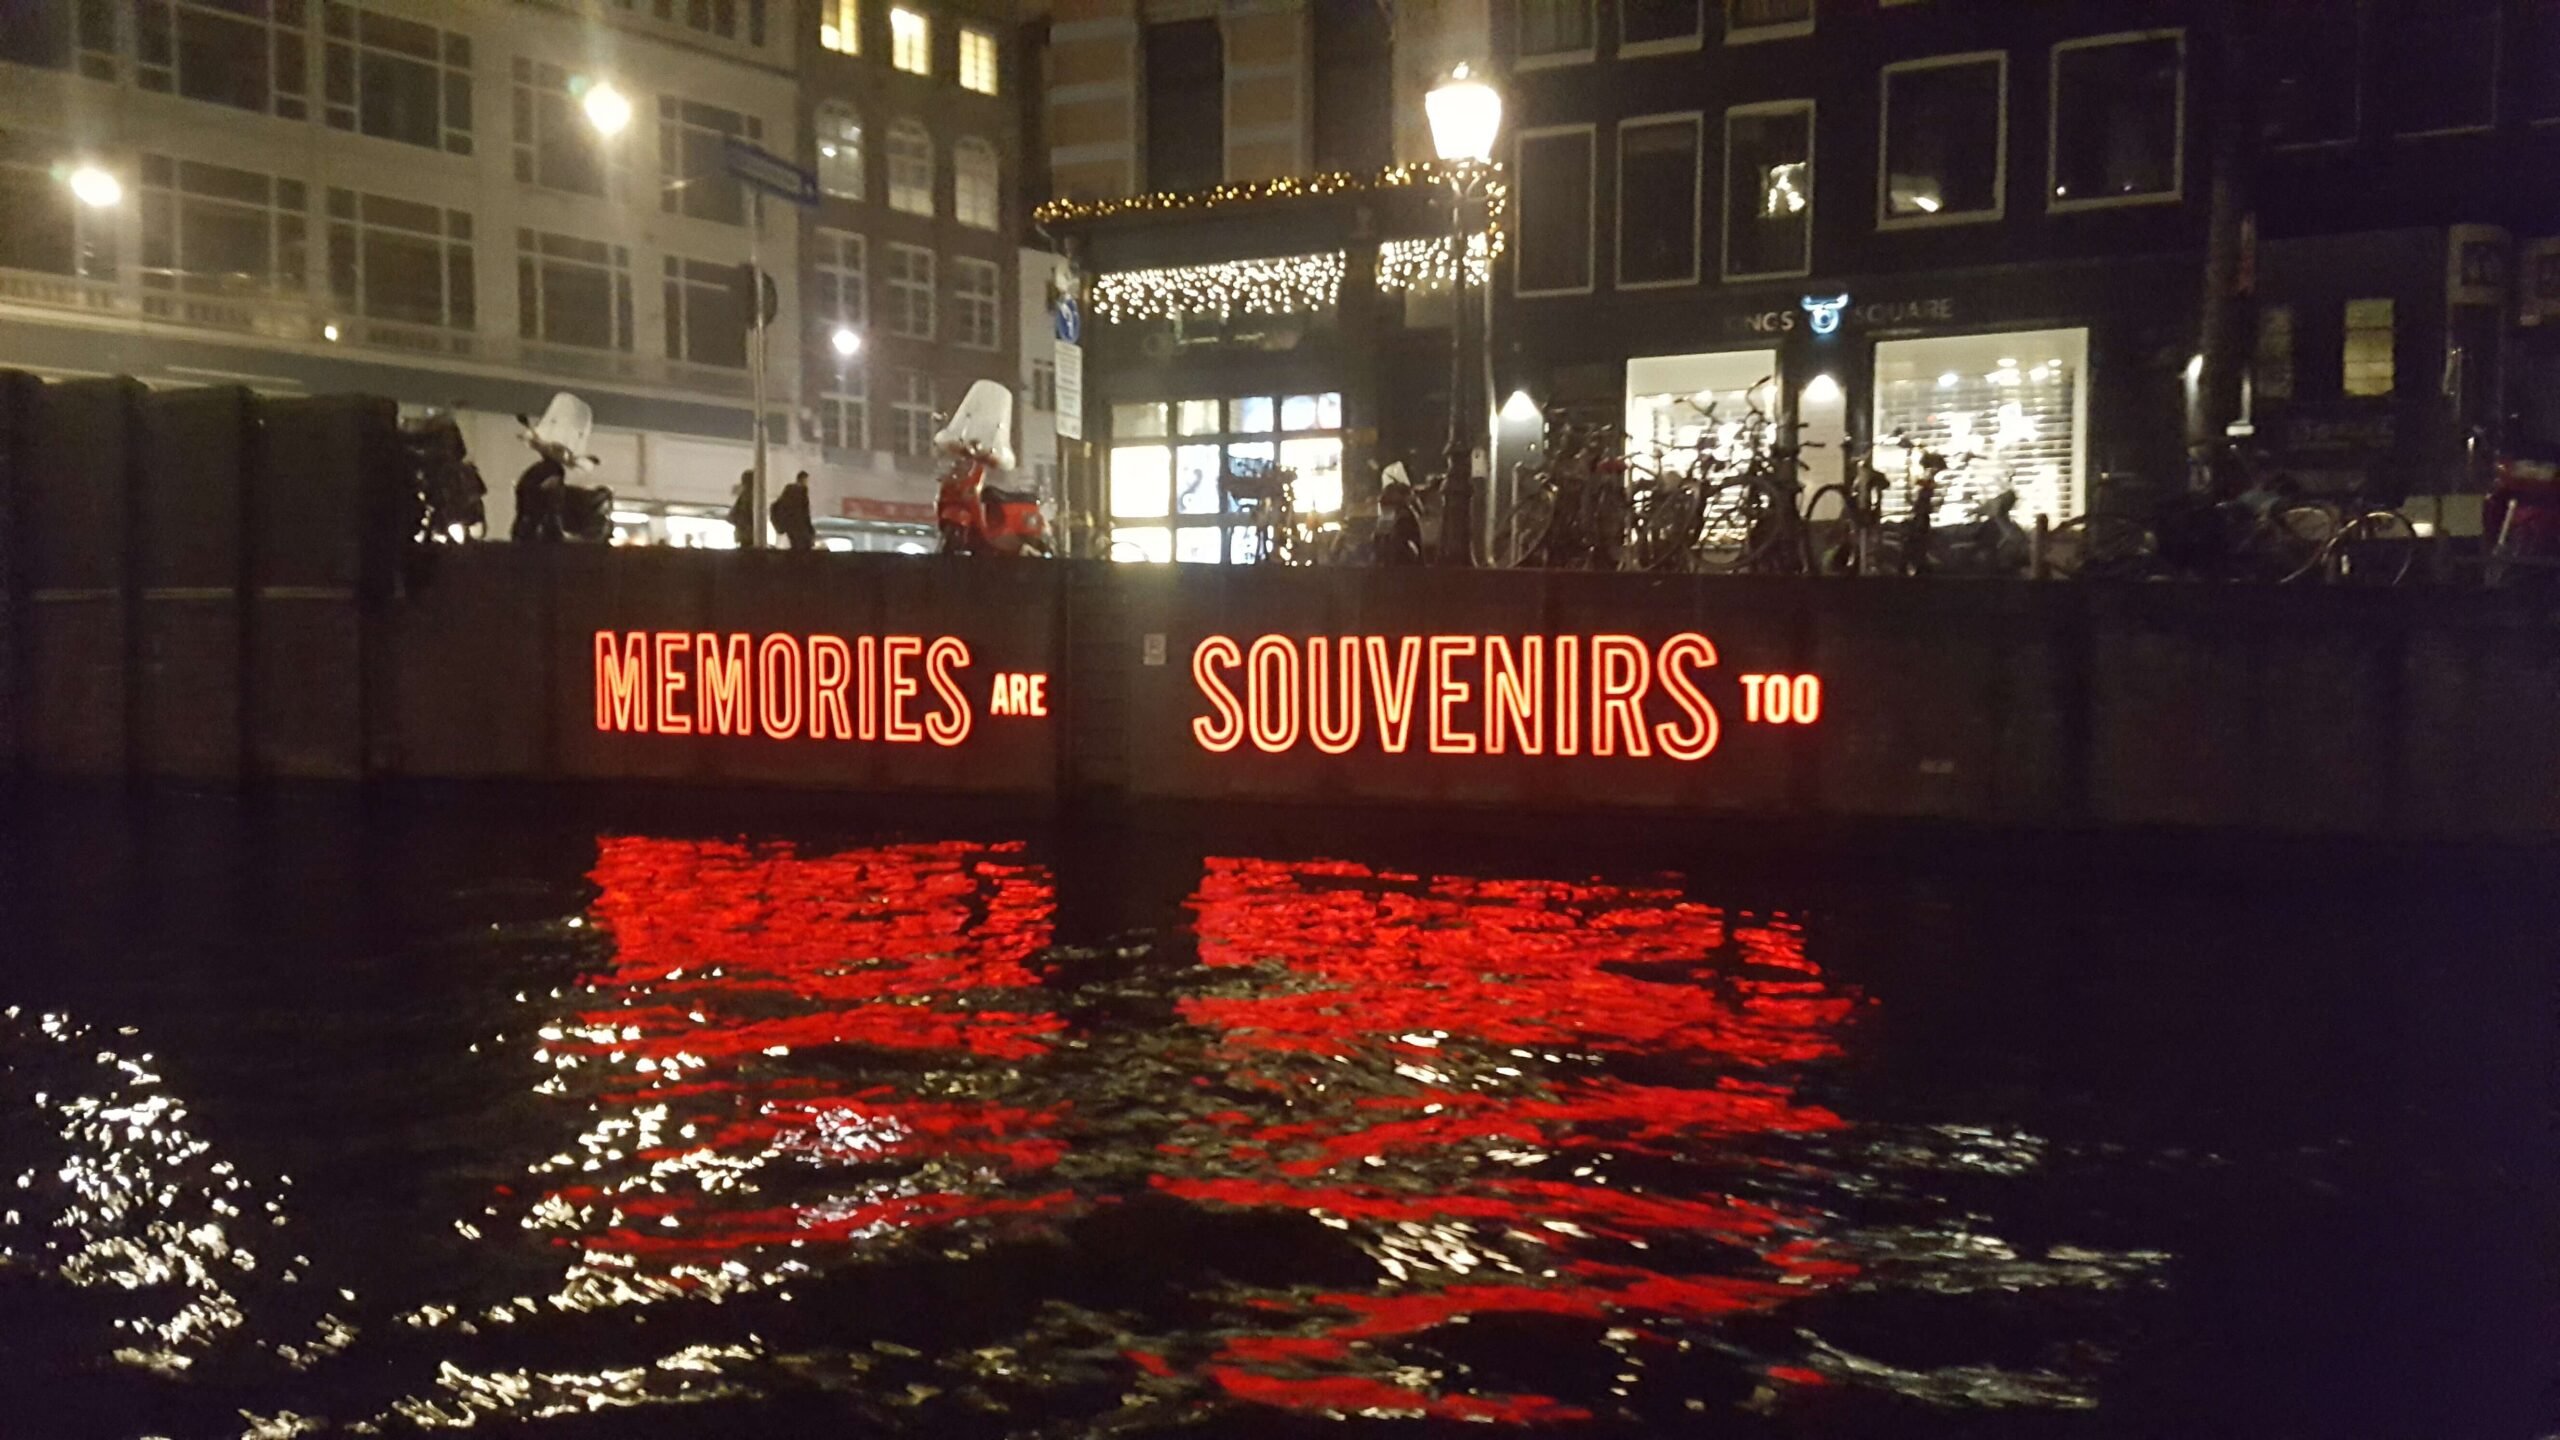 Red neon light art reading "memories are souvenirs too" on the side of the canal at night